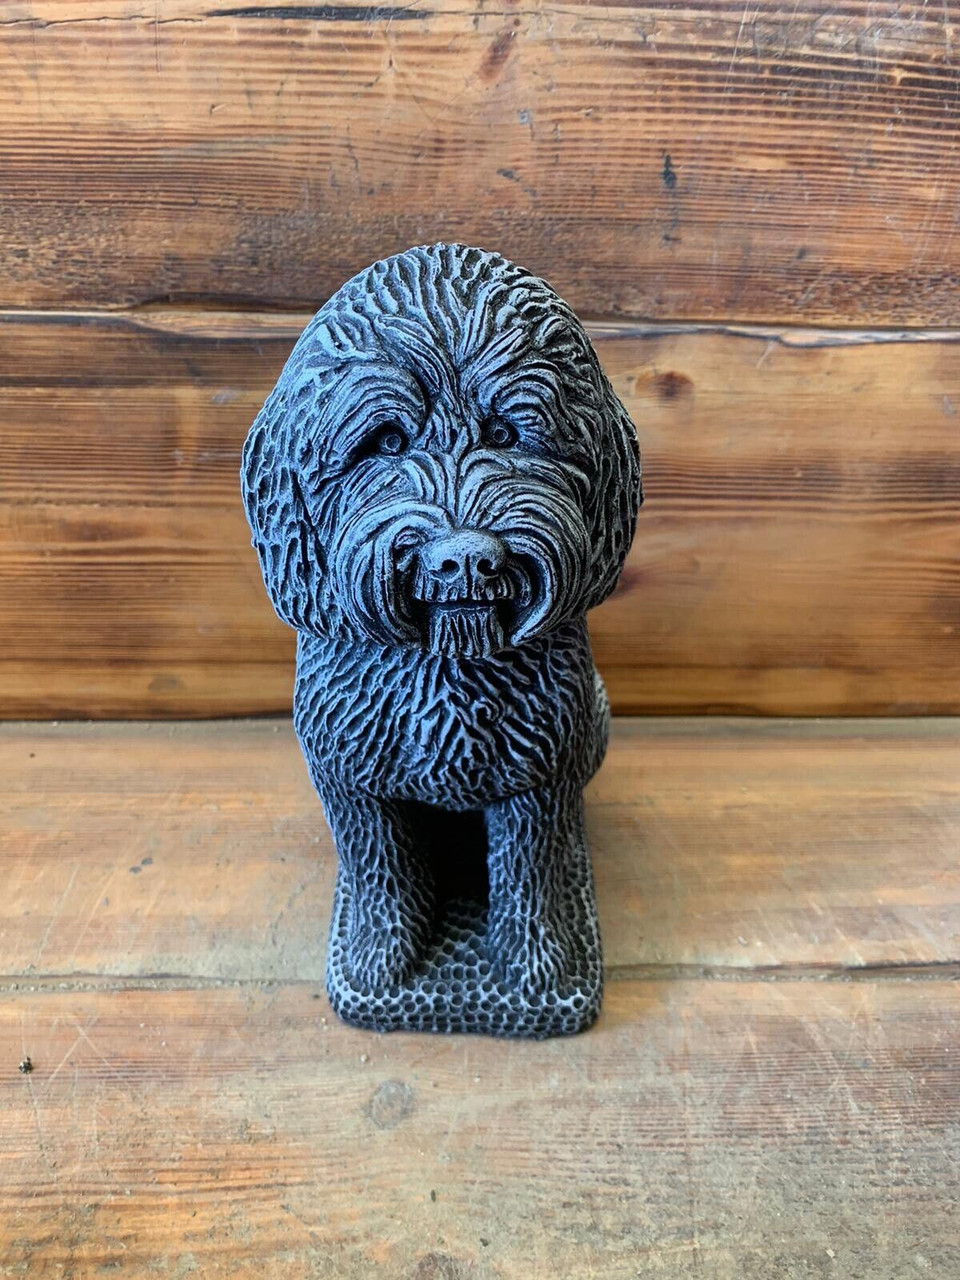 STONE GARDEN DETAILED COCKAPOO POODLE DOG GIFT  STATUE ORNAMENT